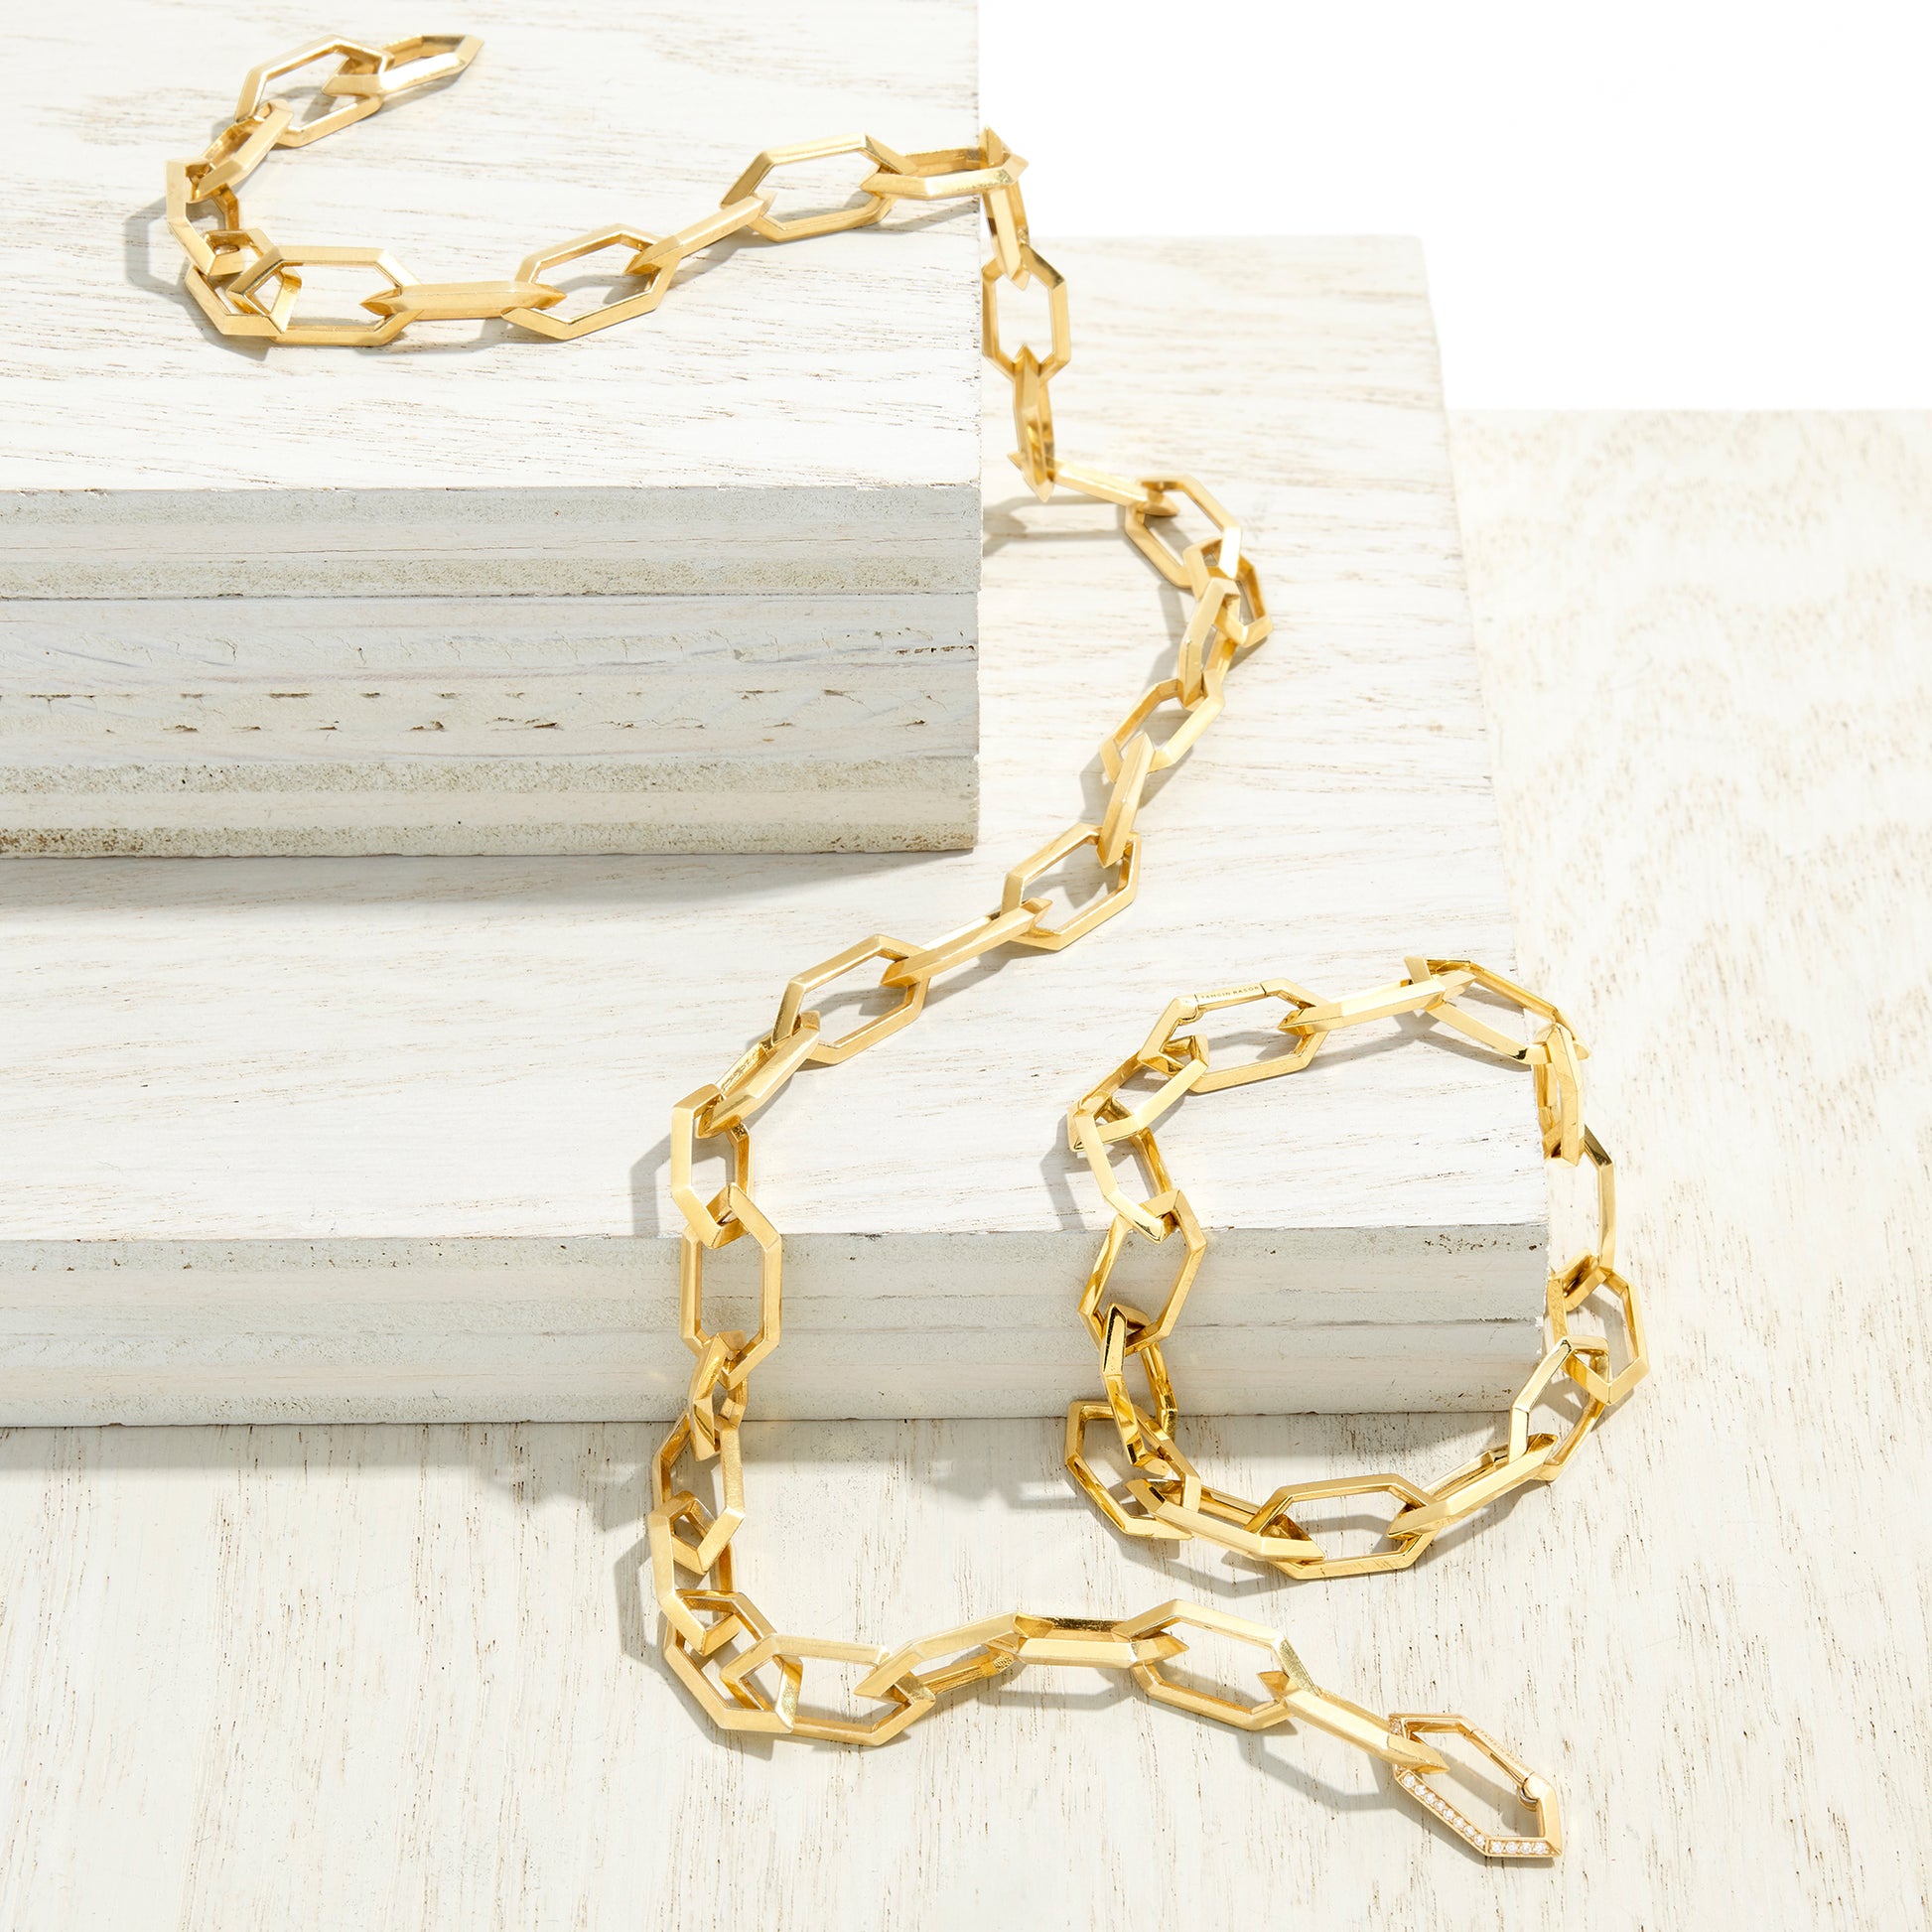 Makhaira solid gold chunky chain link bracelet by Tamsin Rasor Fine Jewelry